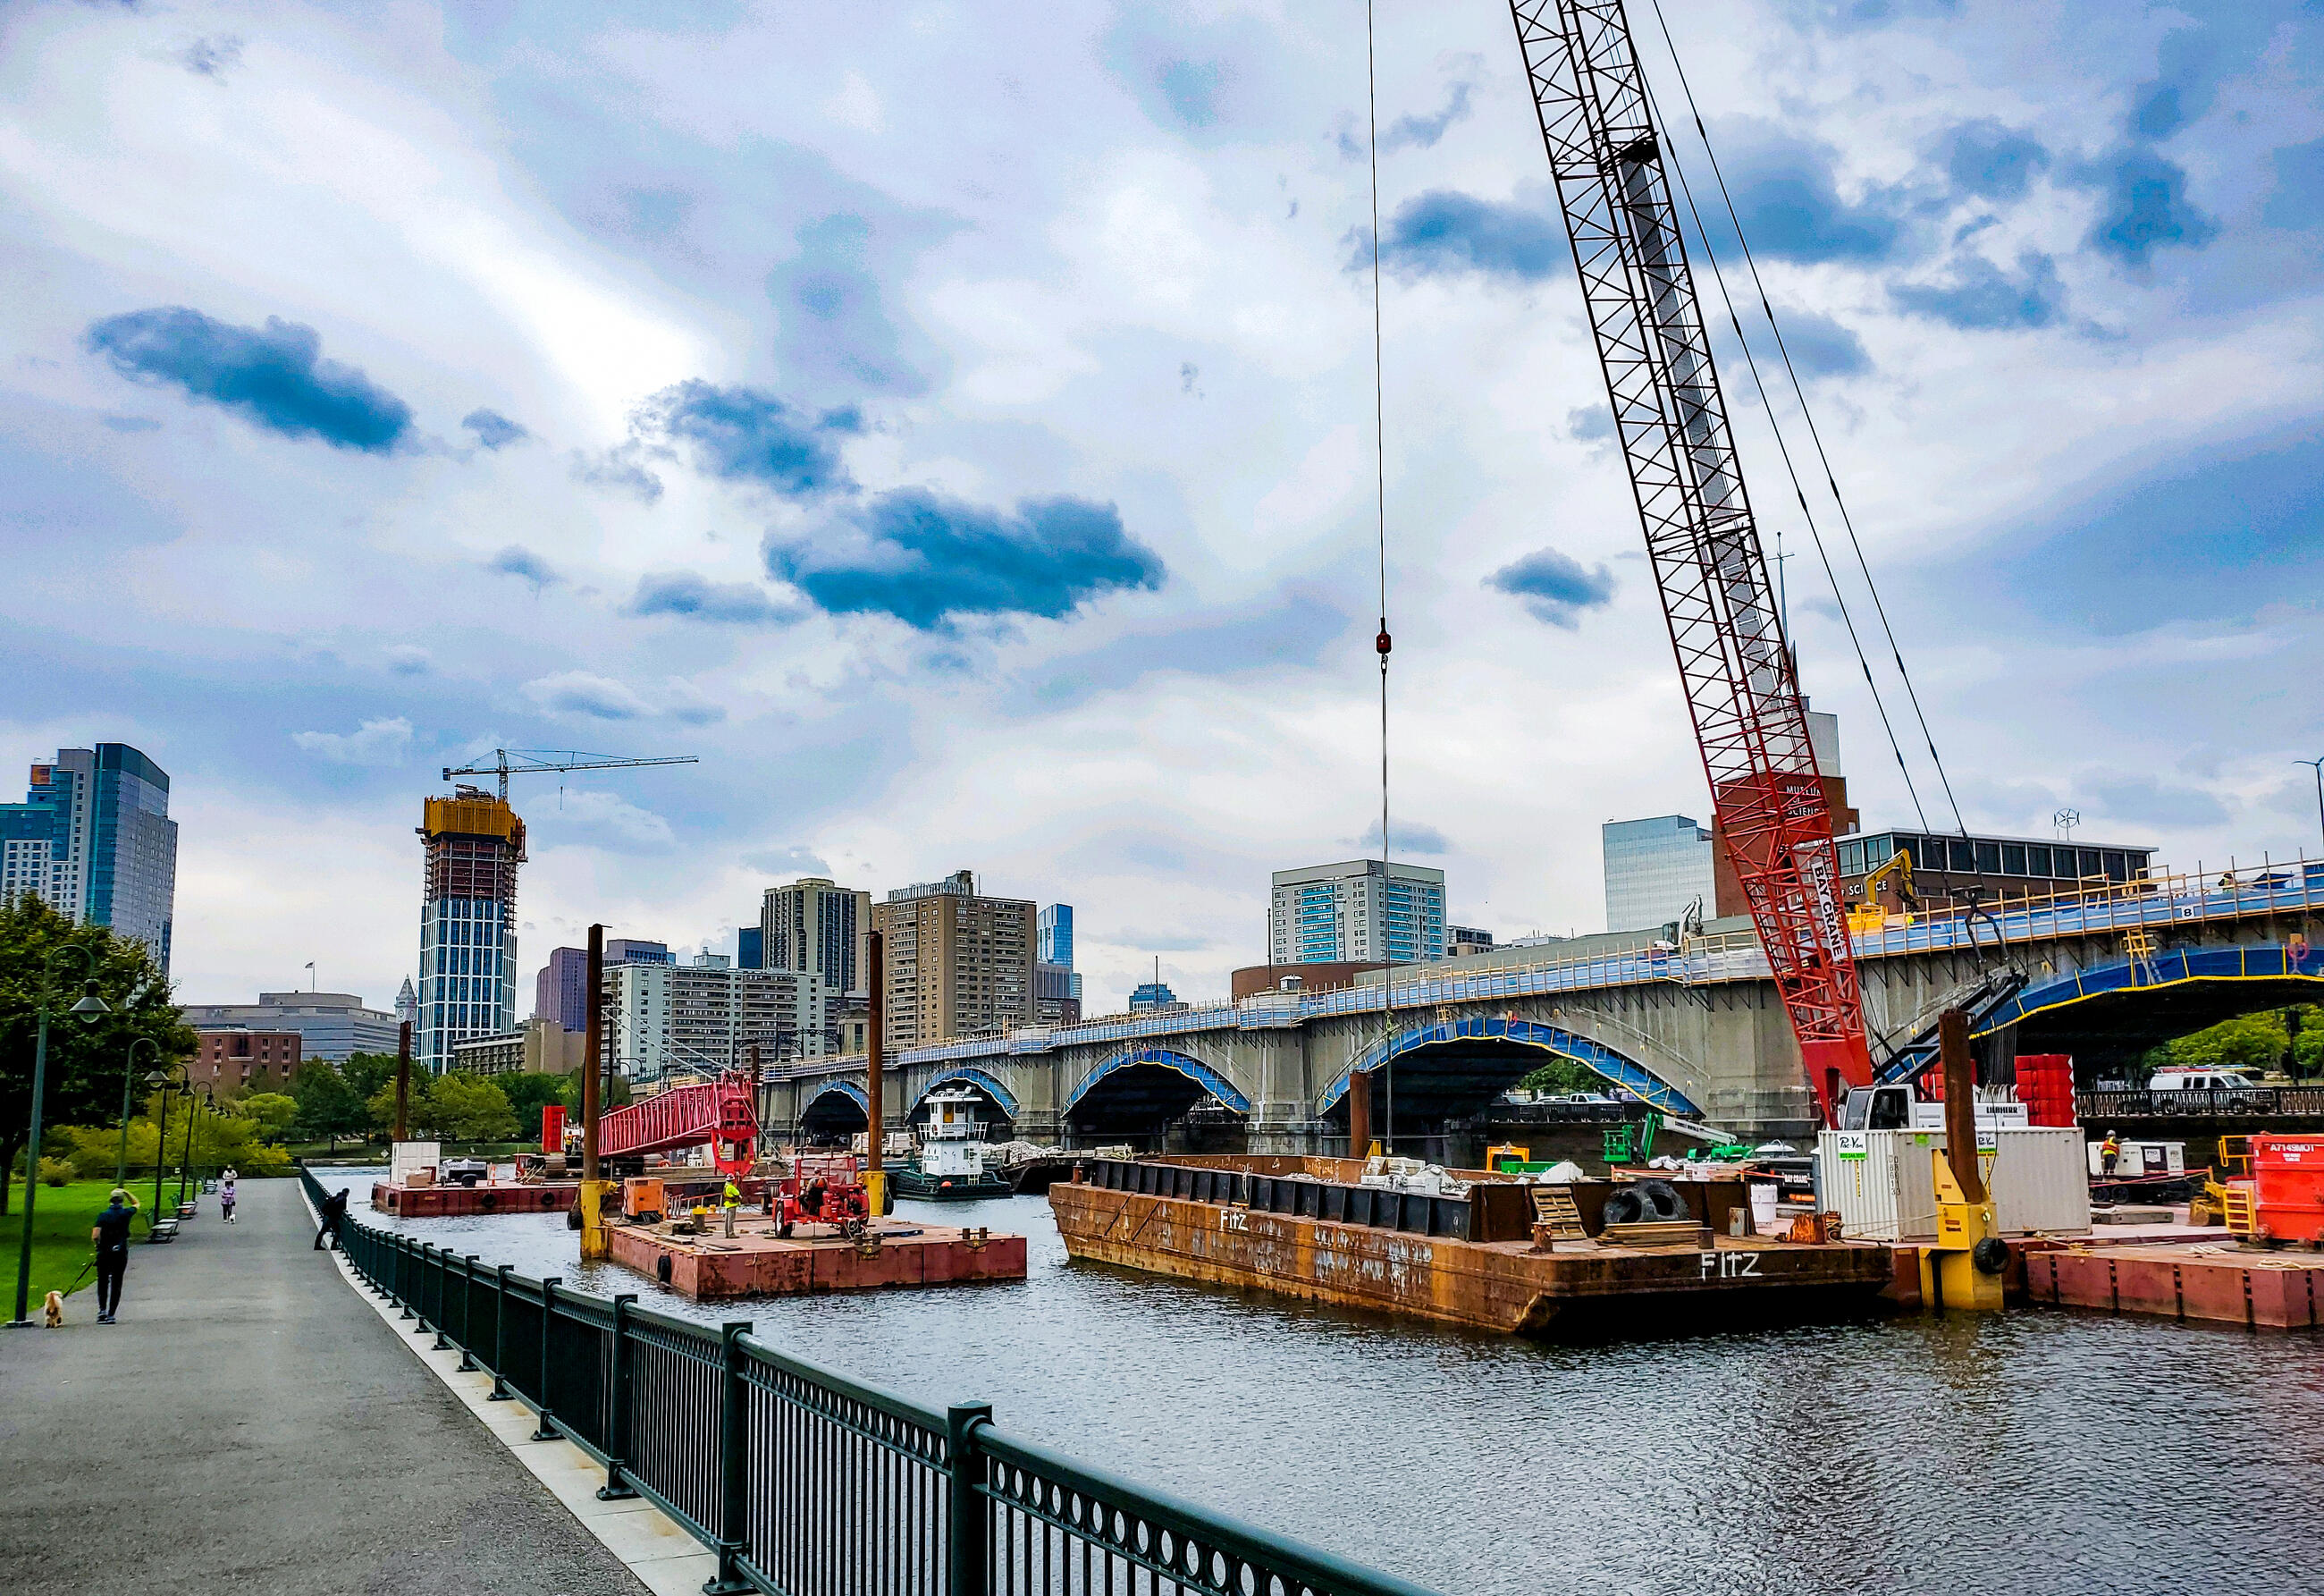 Cranes lift materials onto the Lechmere Viaduct as crews work on the rehabilitation project (October 2020)